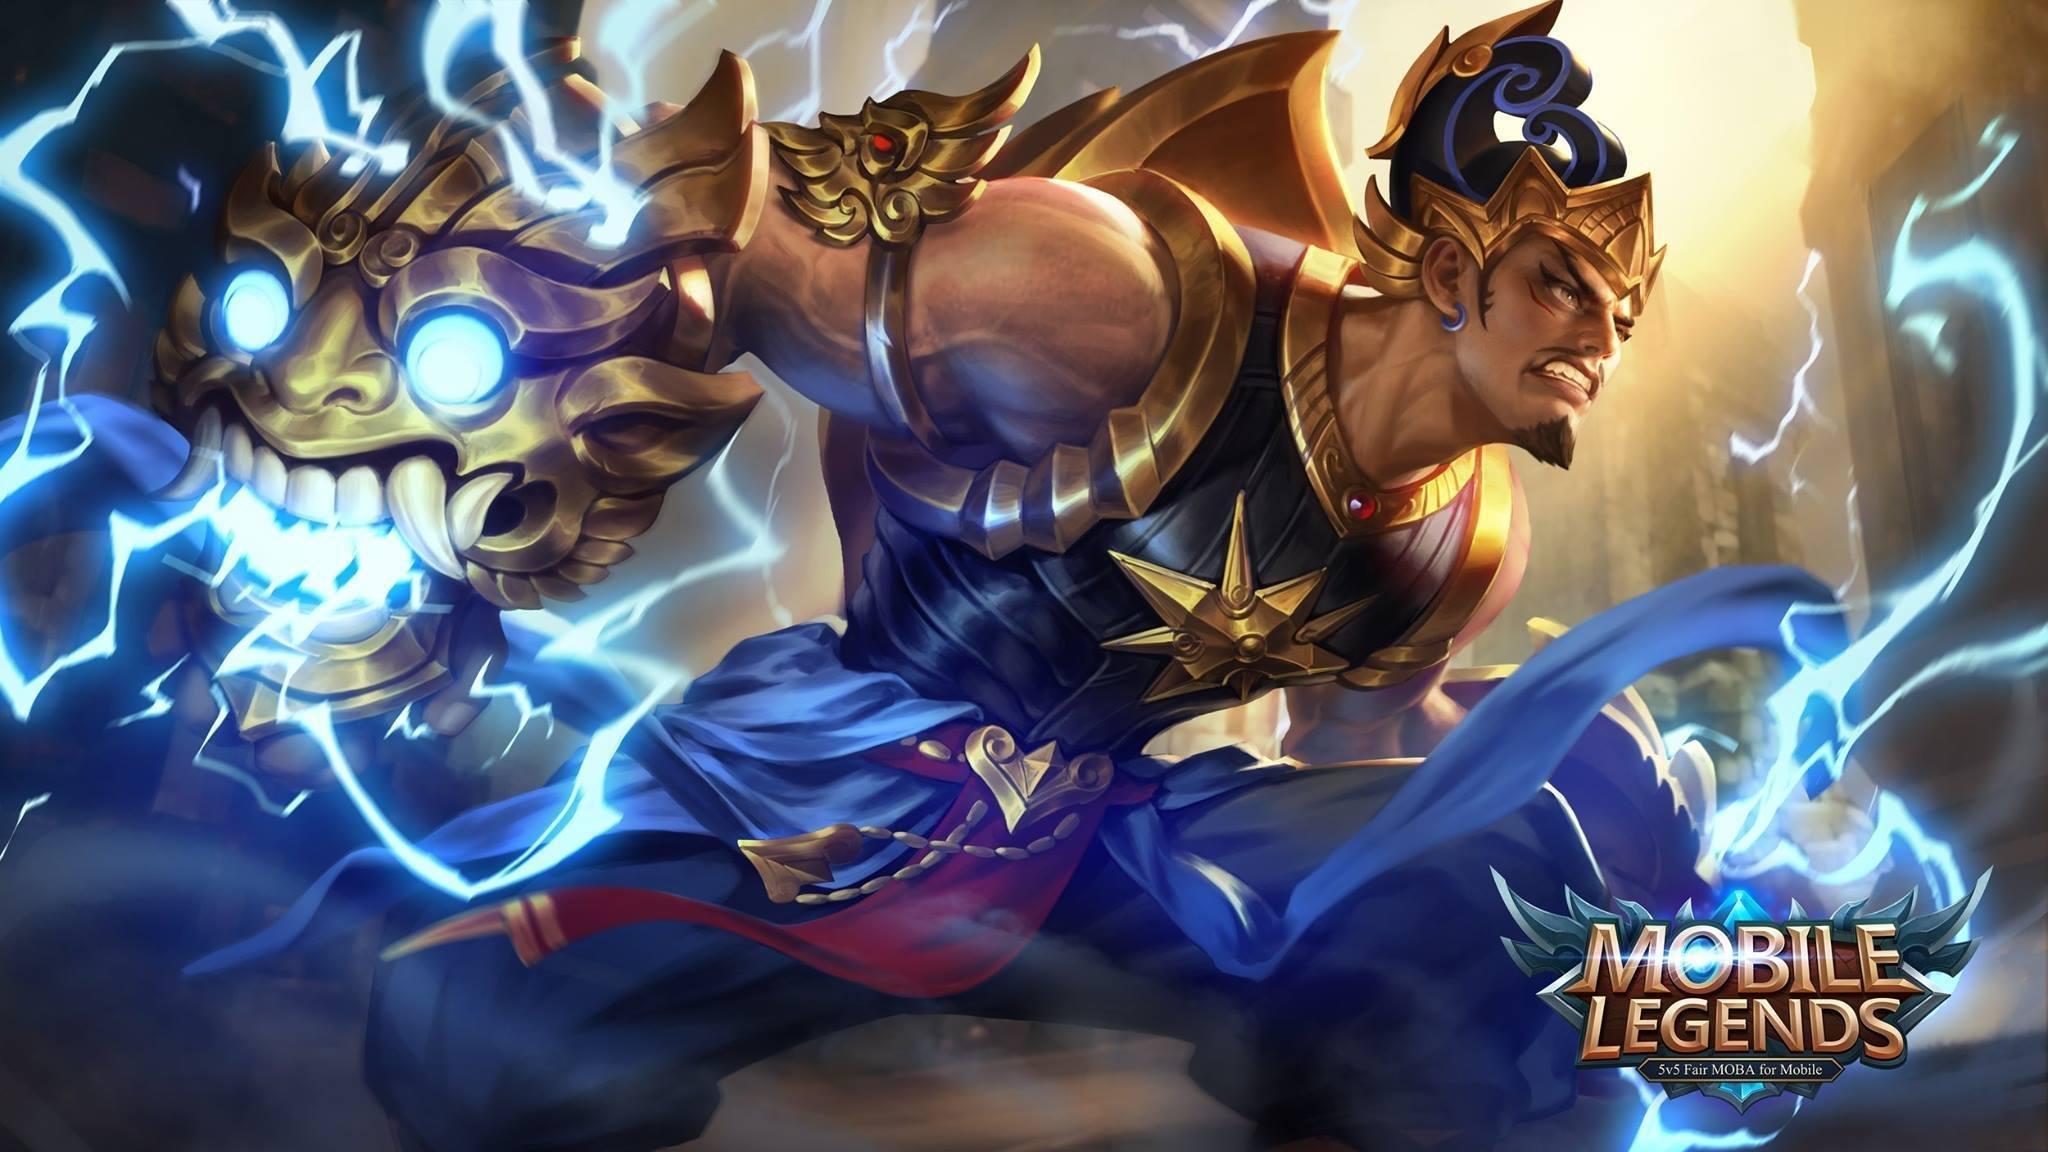 Mobile Legends Wallpapers Hd